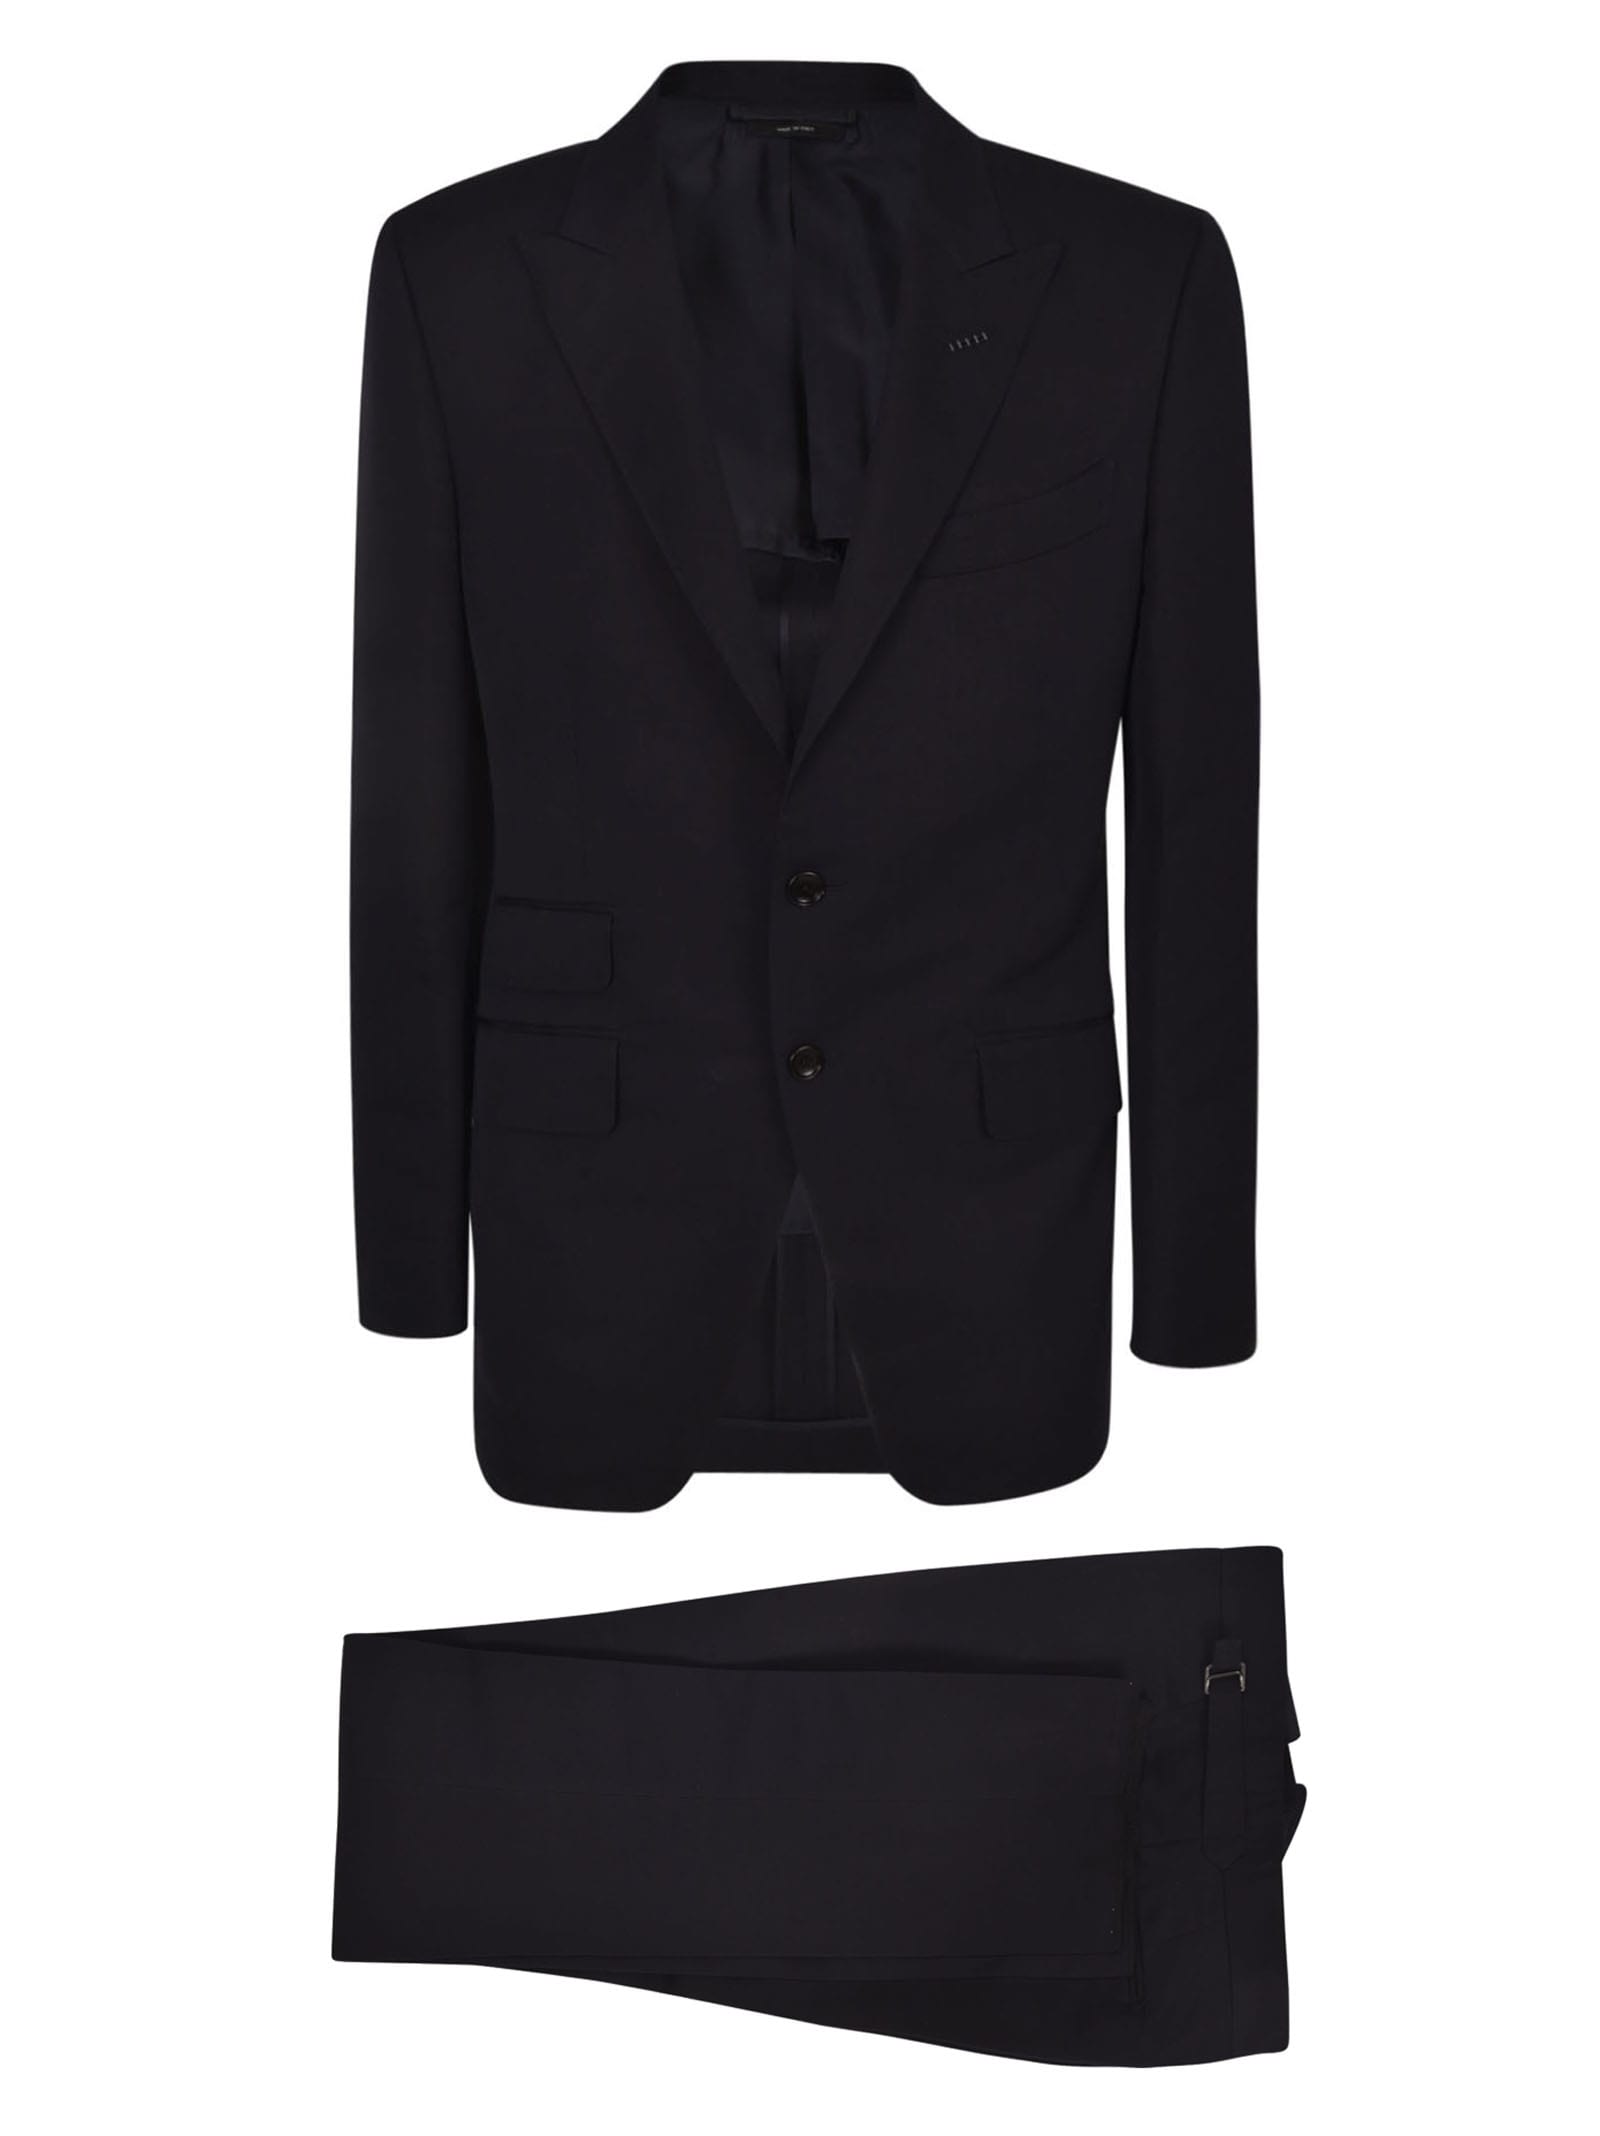 Tom Ford Single-Breasted Suit